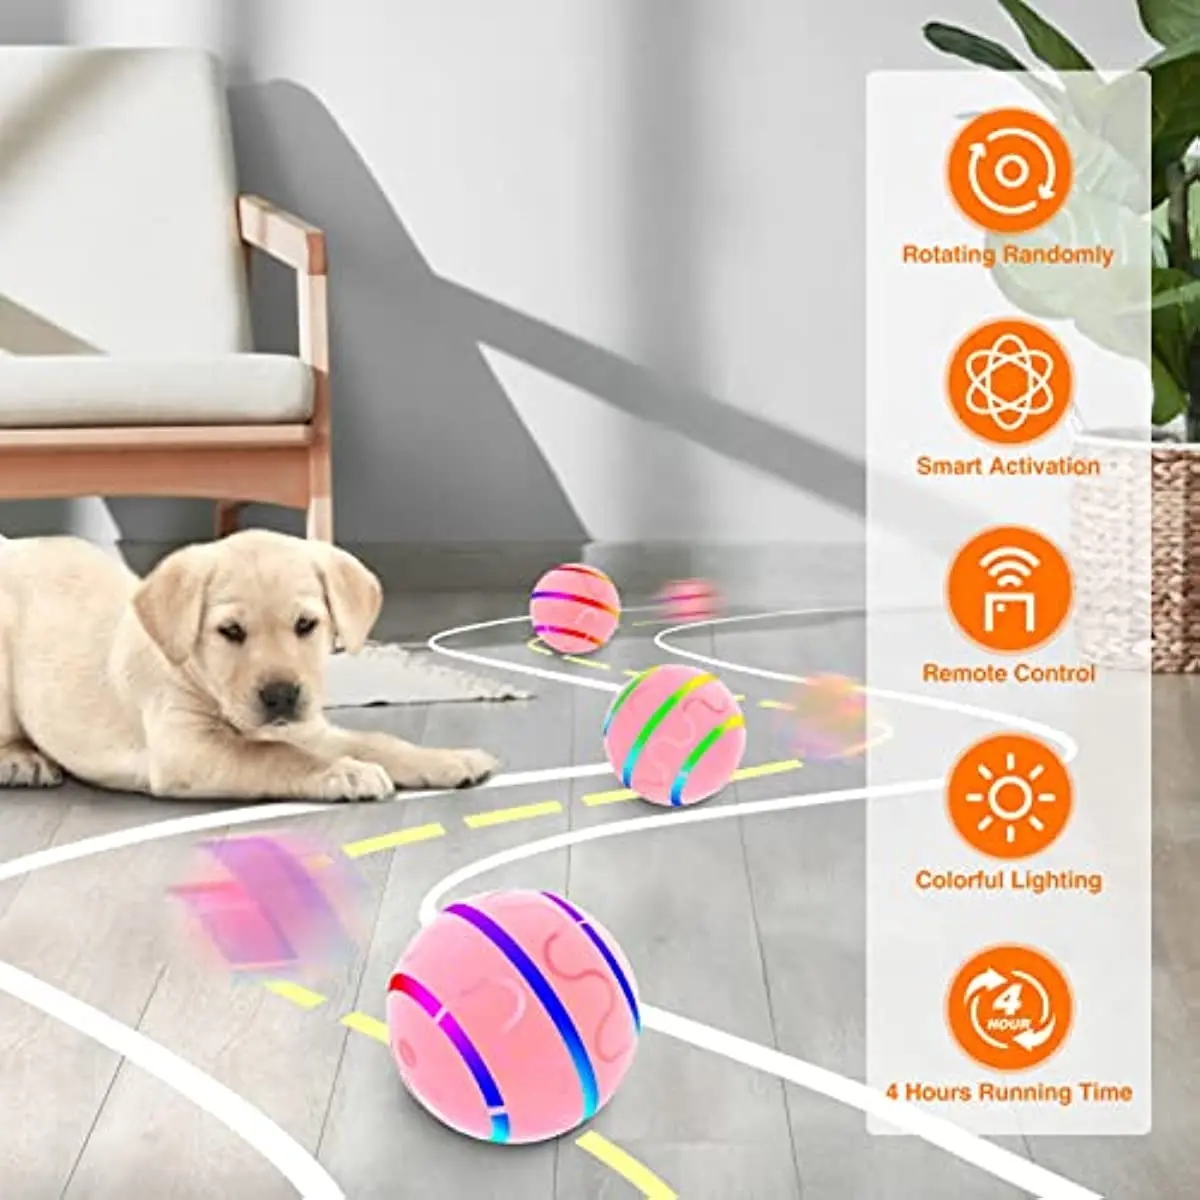 A big pup is laying on a floor with neon colored balls.